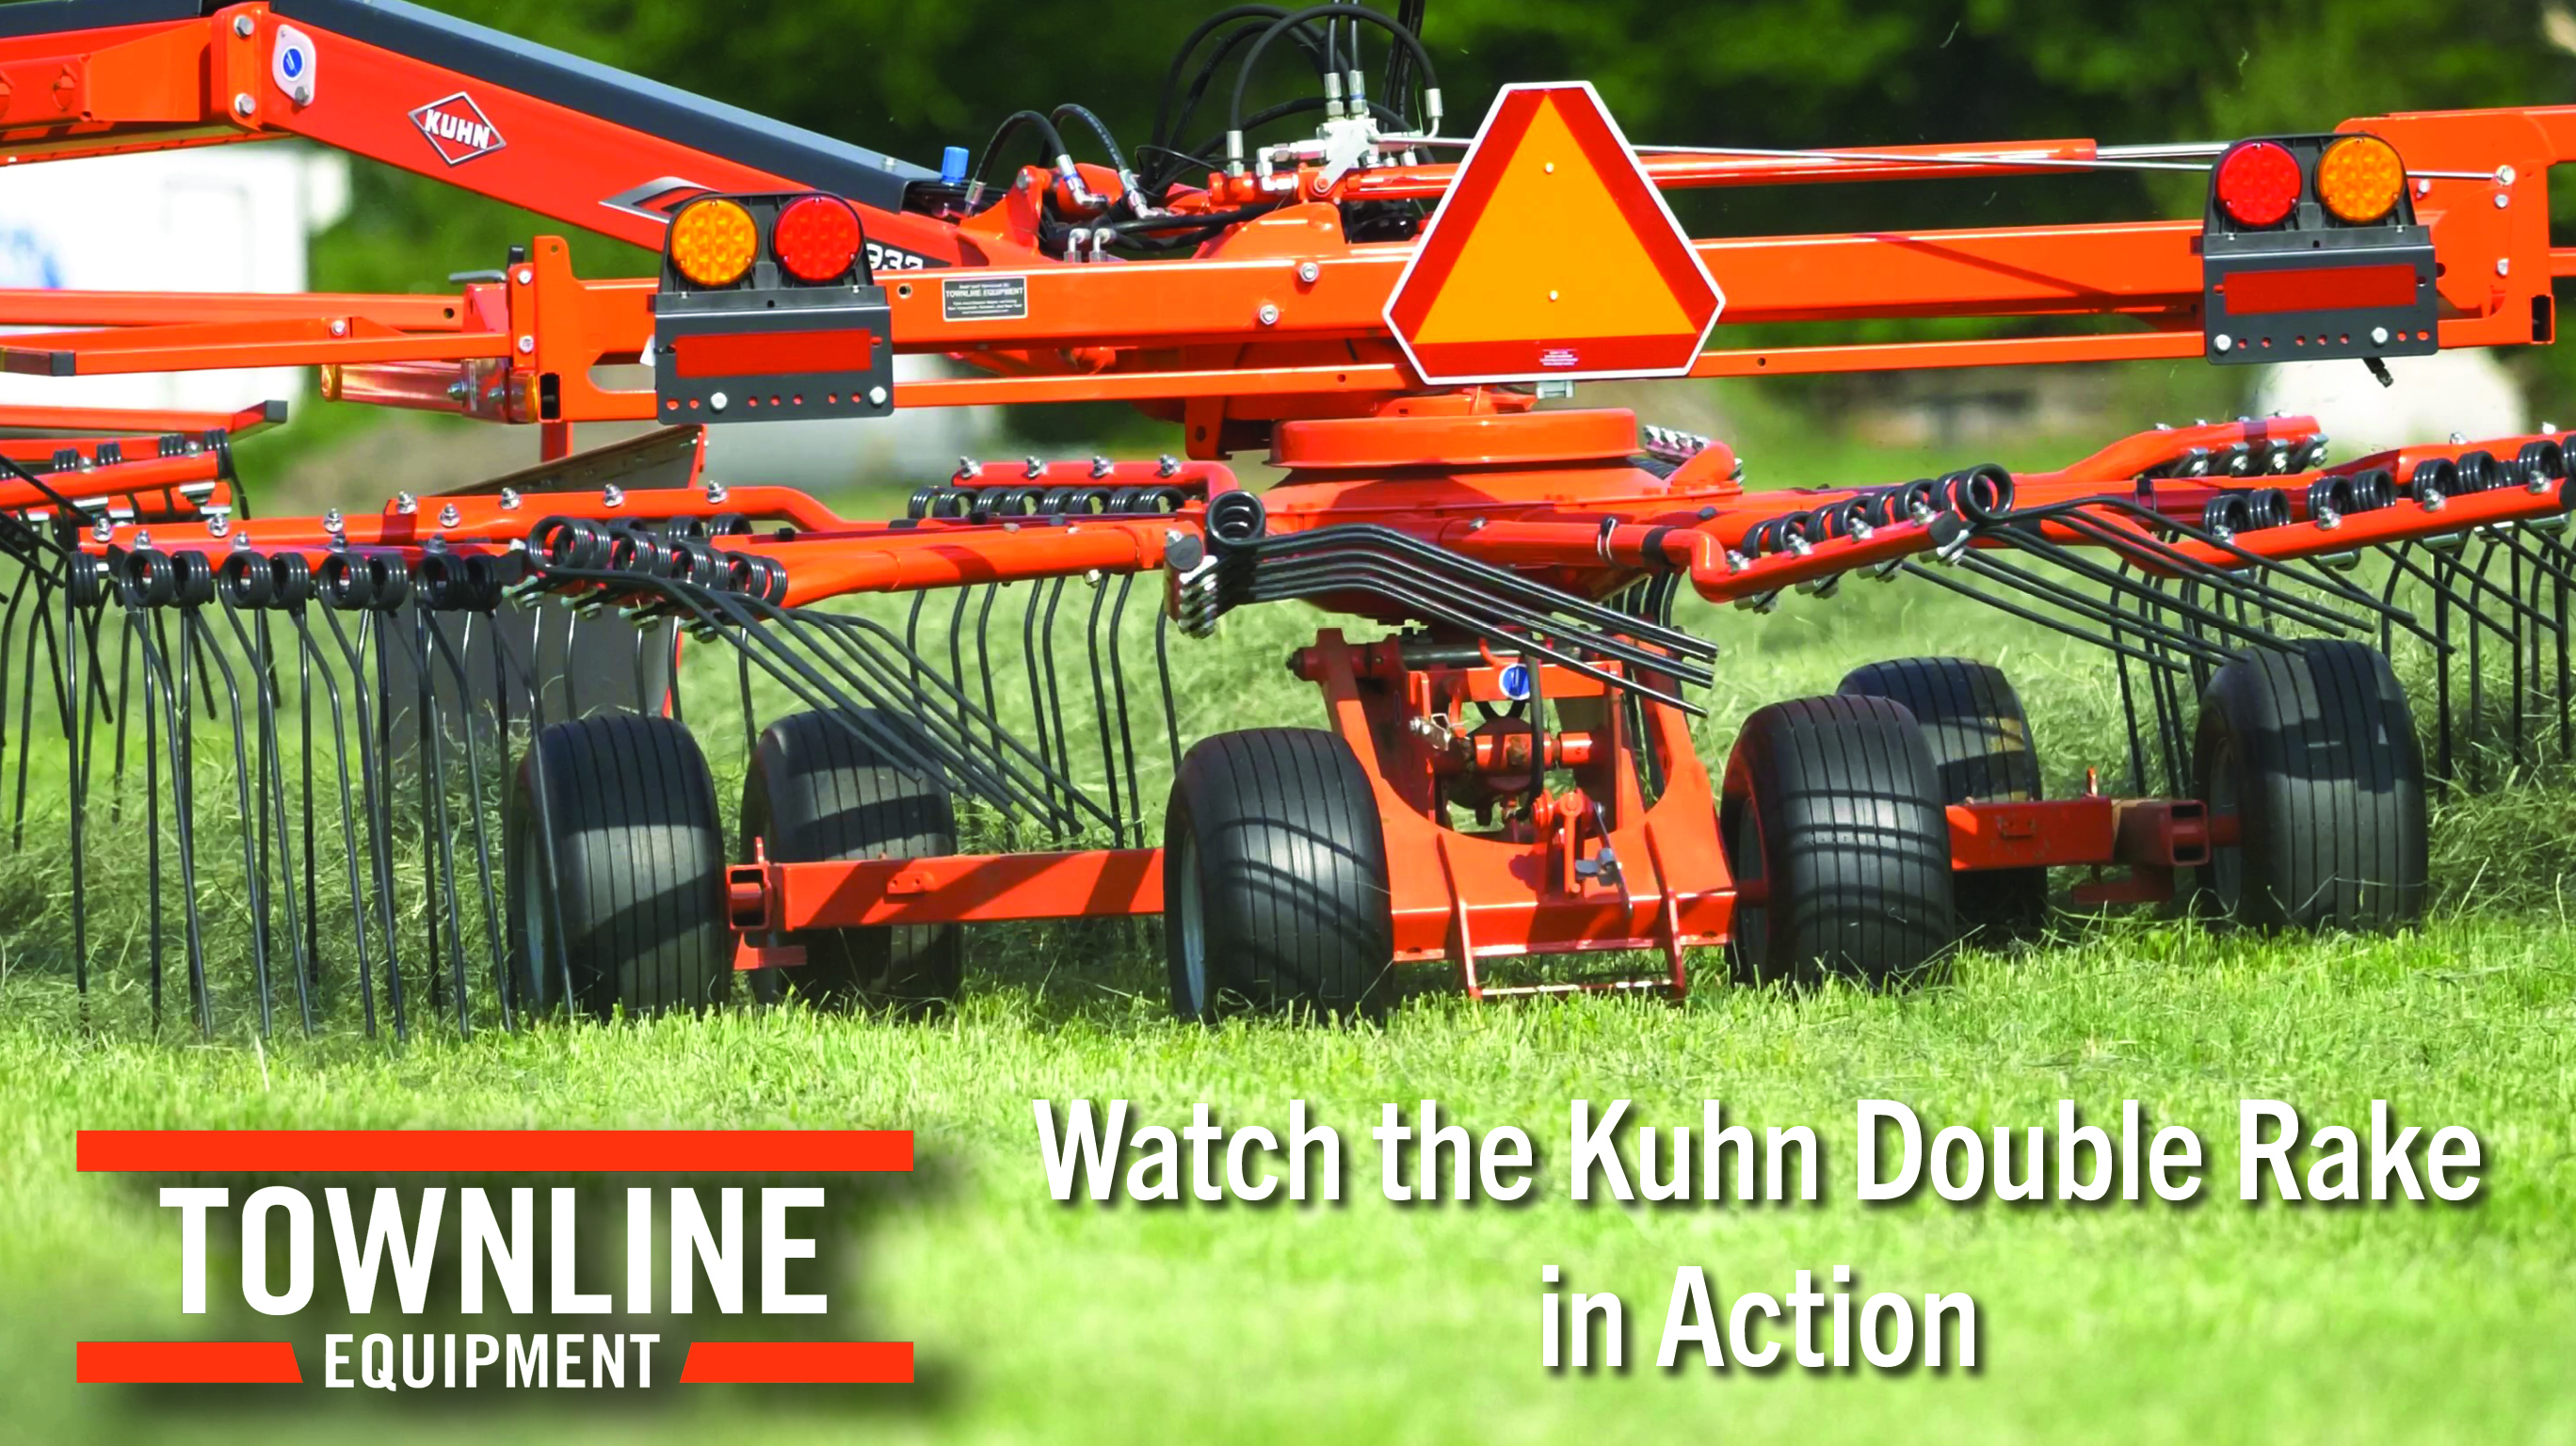 M6 111 with a Kuhn Double Rake